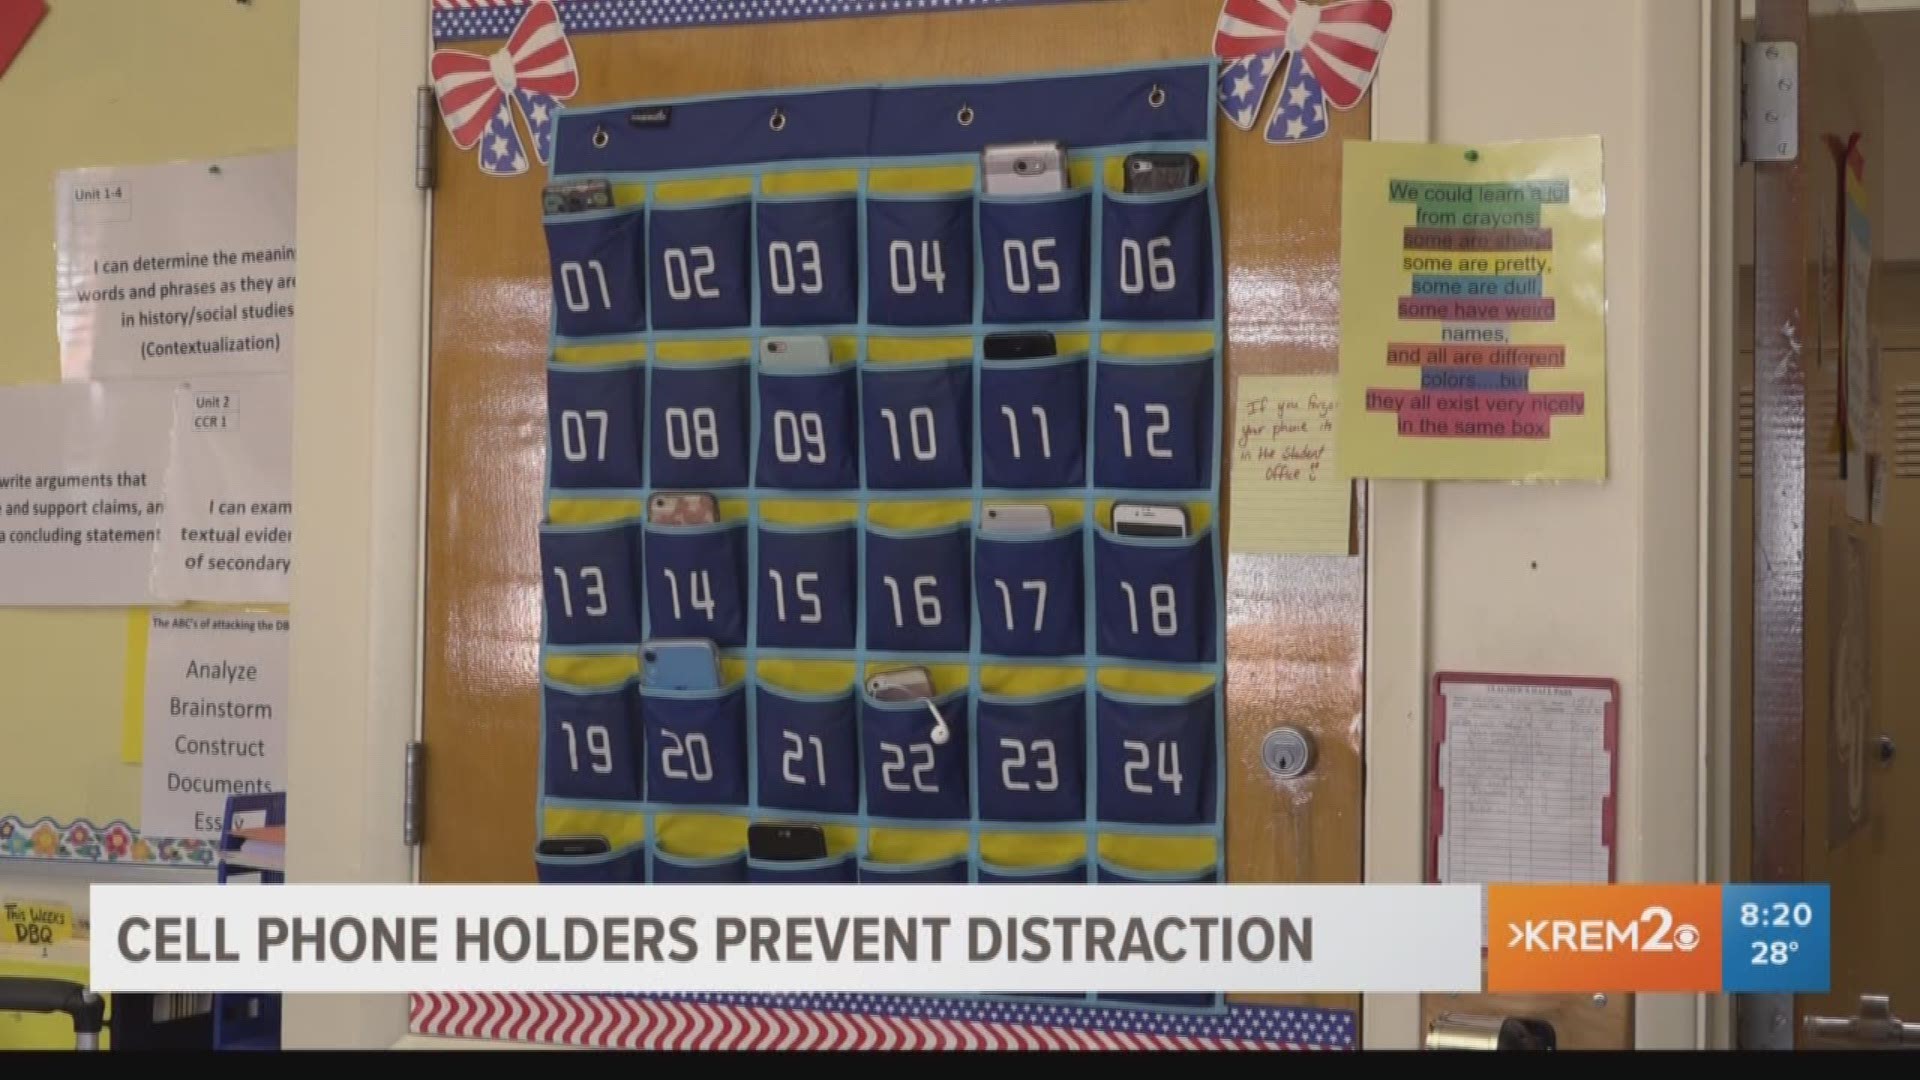 Sacajawea Middle School is the only middle school in Spokane where every single classroom uses the cellphone holders to prevent distractions.